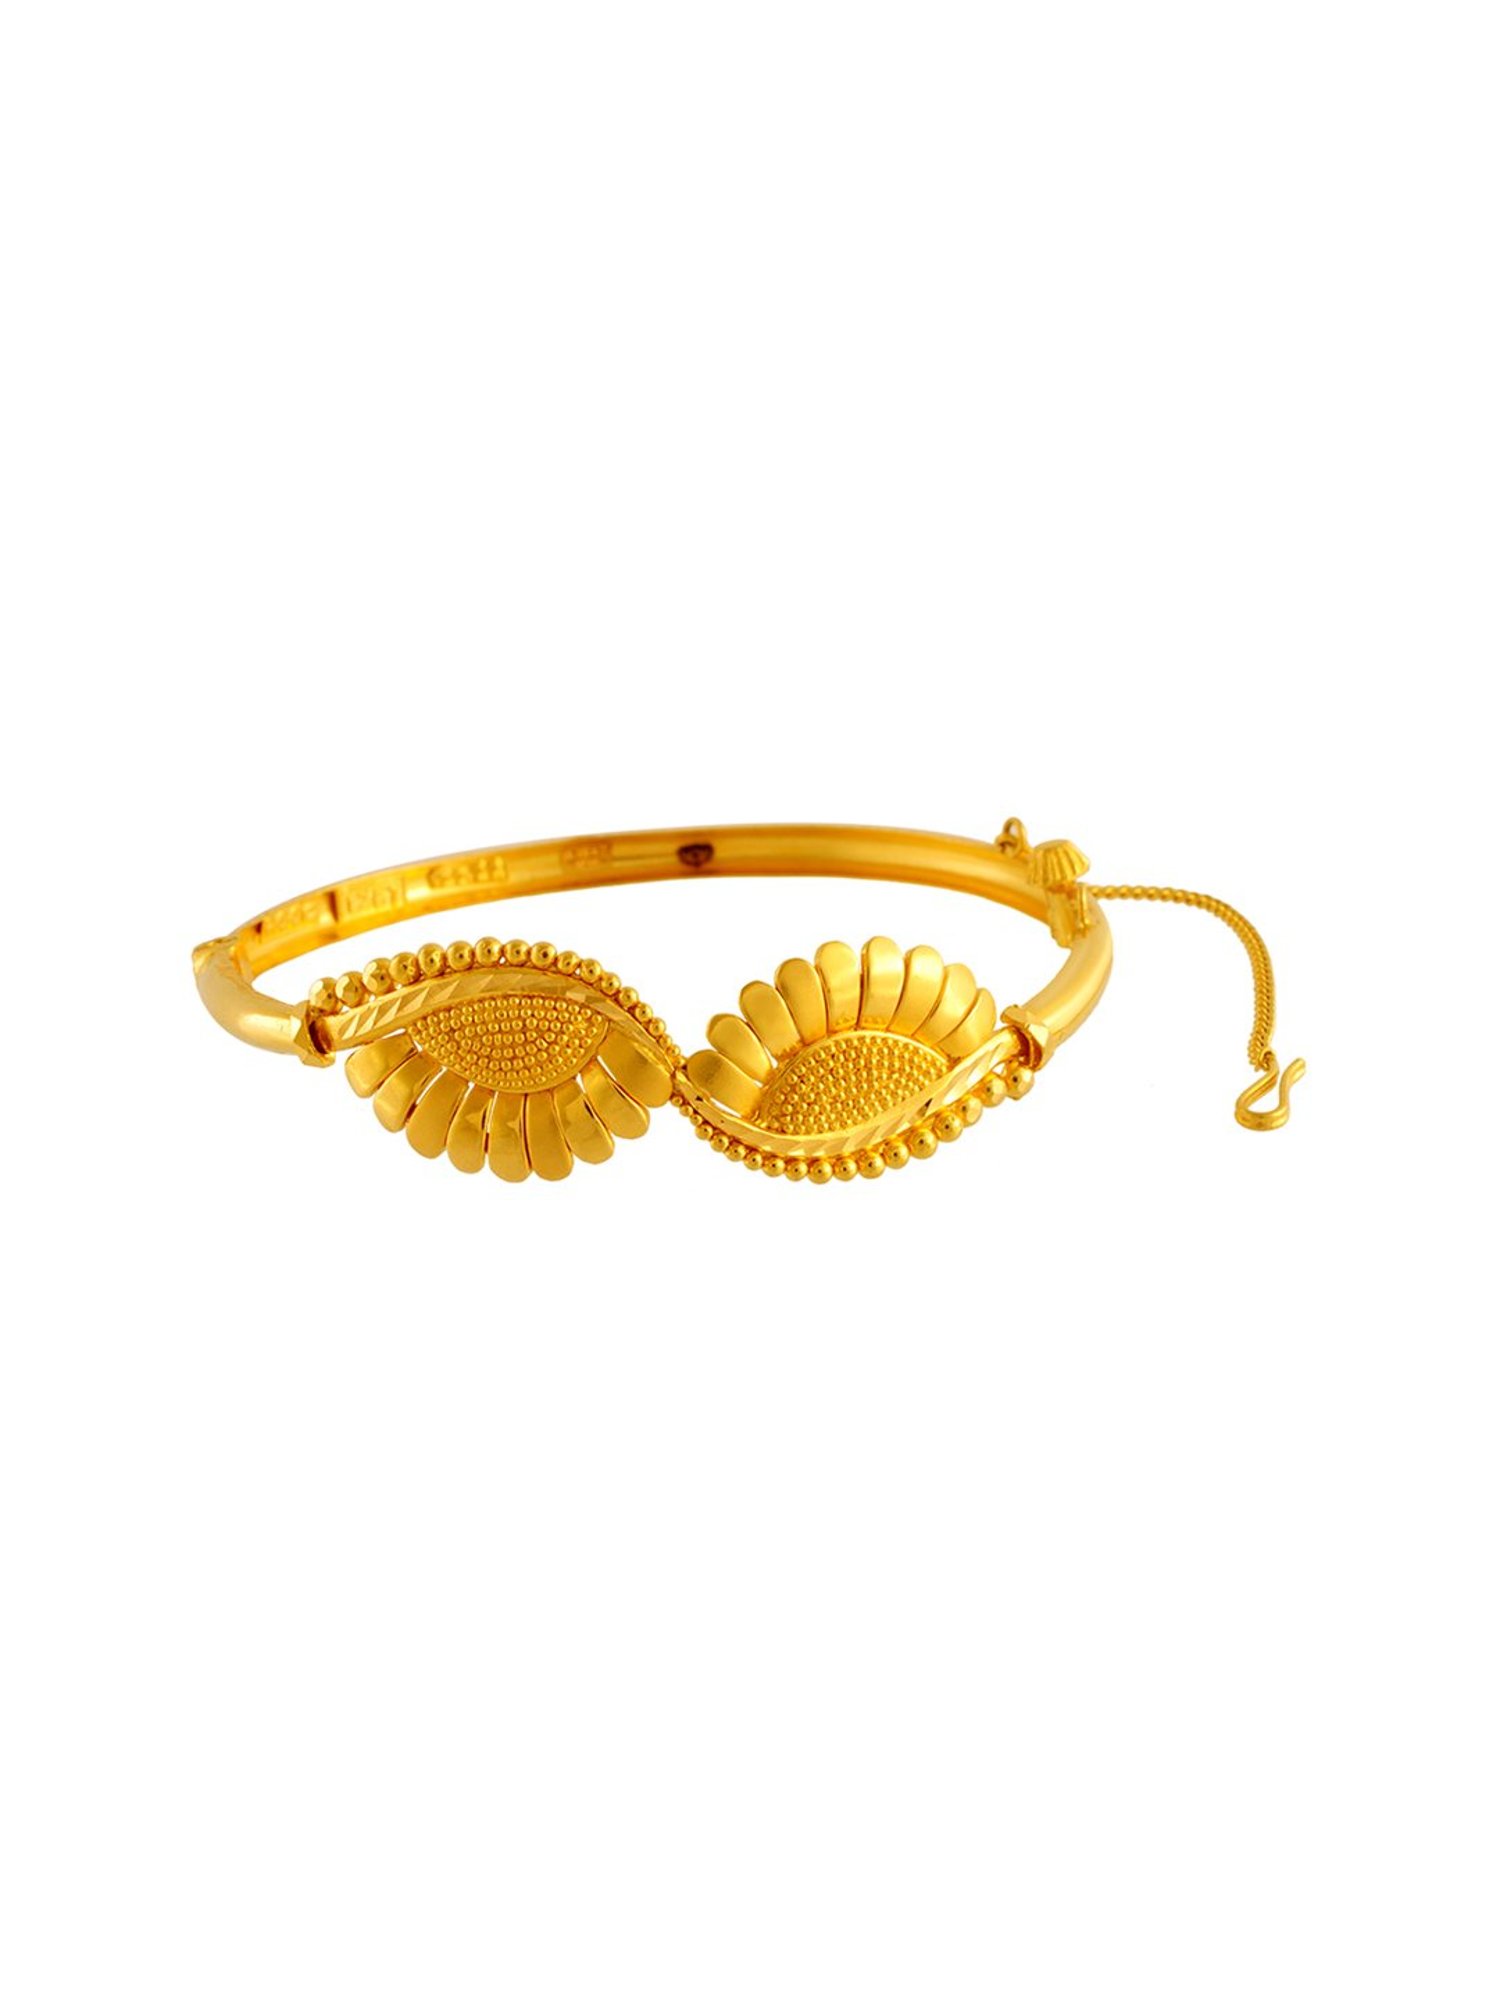 PC Chandra Jewellers Musical Note With Trumpet Yellow Gold 14kt Bracelet  Price in India - Buy PC Chandra Jewellers Musical Note With Trumpet Yellow  Gold 14kt Bracelet online at Flipkart.com